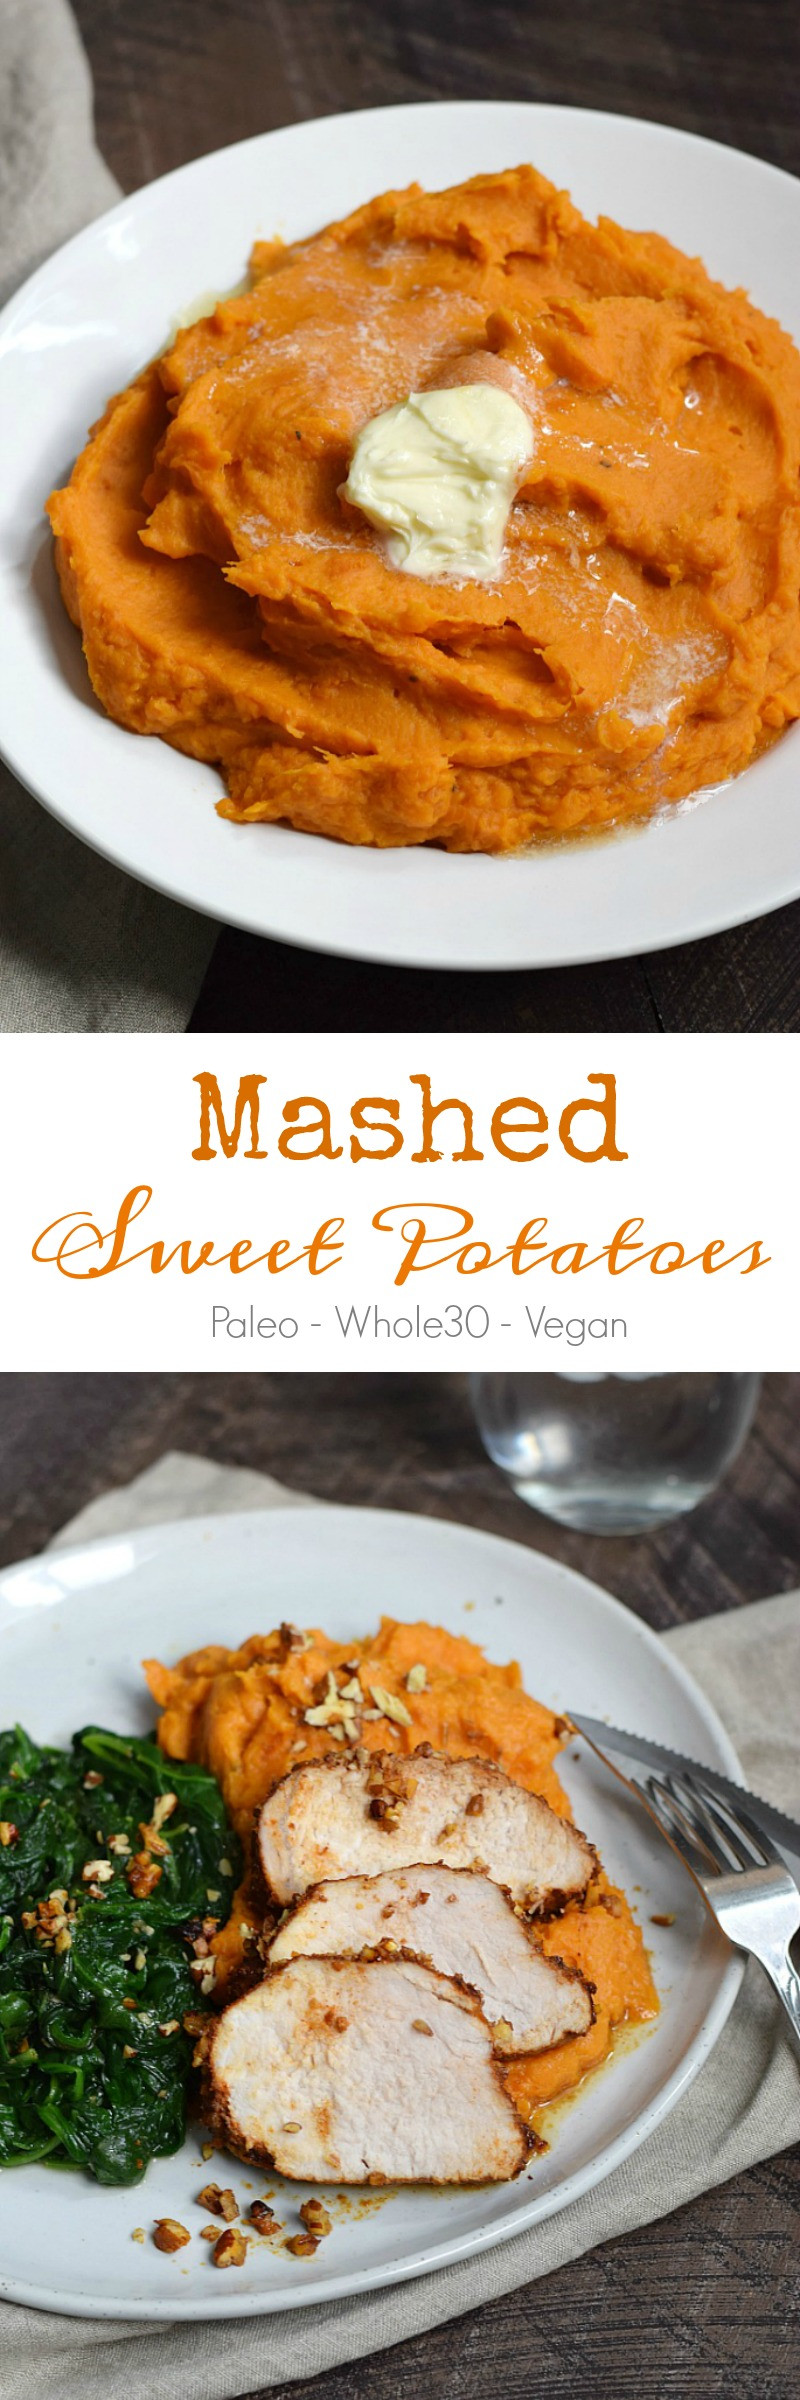 Sweet Potatoes Mashed Paleo
 Mashed Sweet Potatoes Cooking With Curls